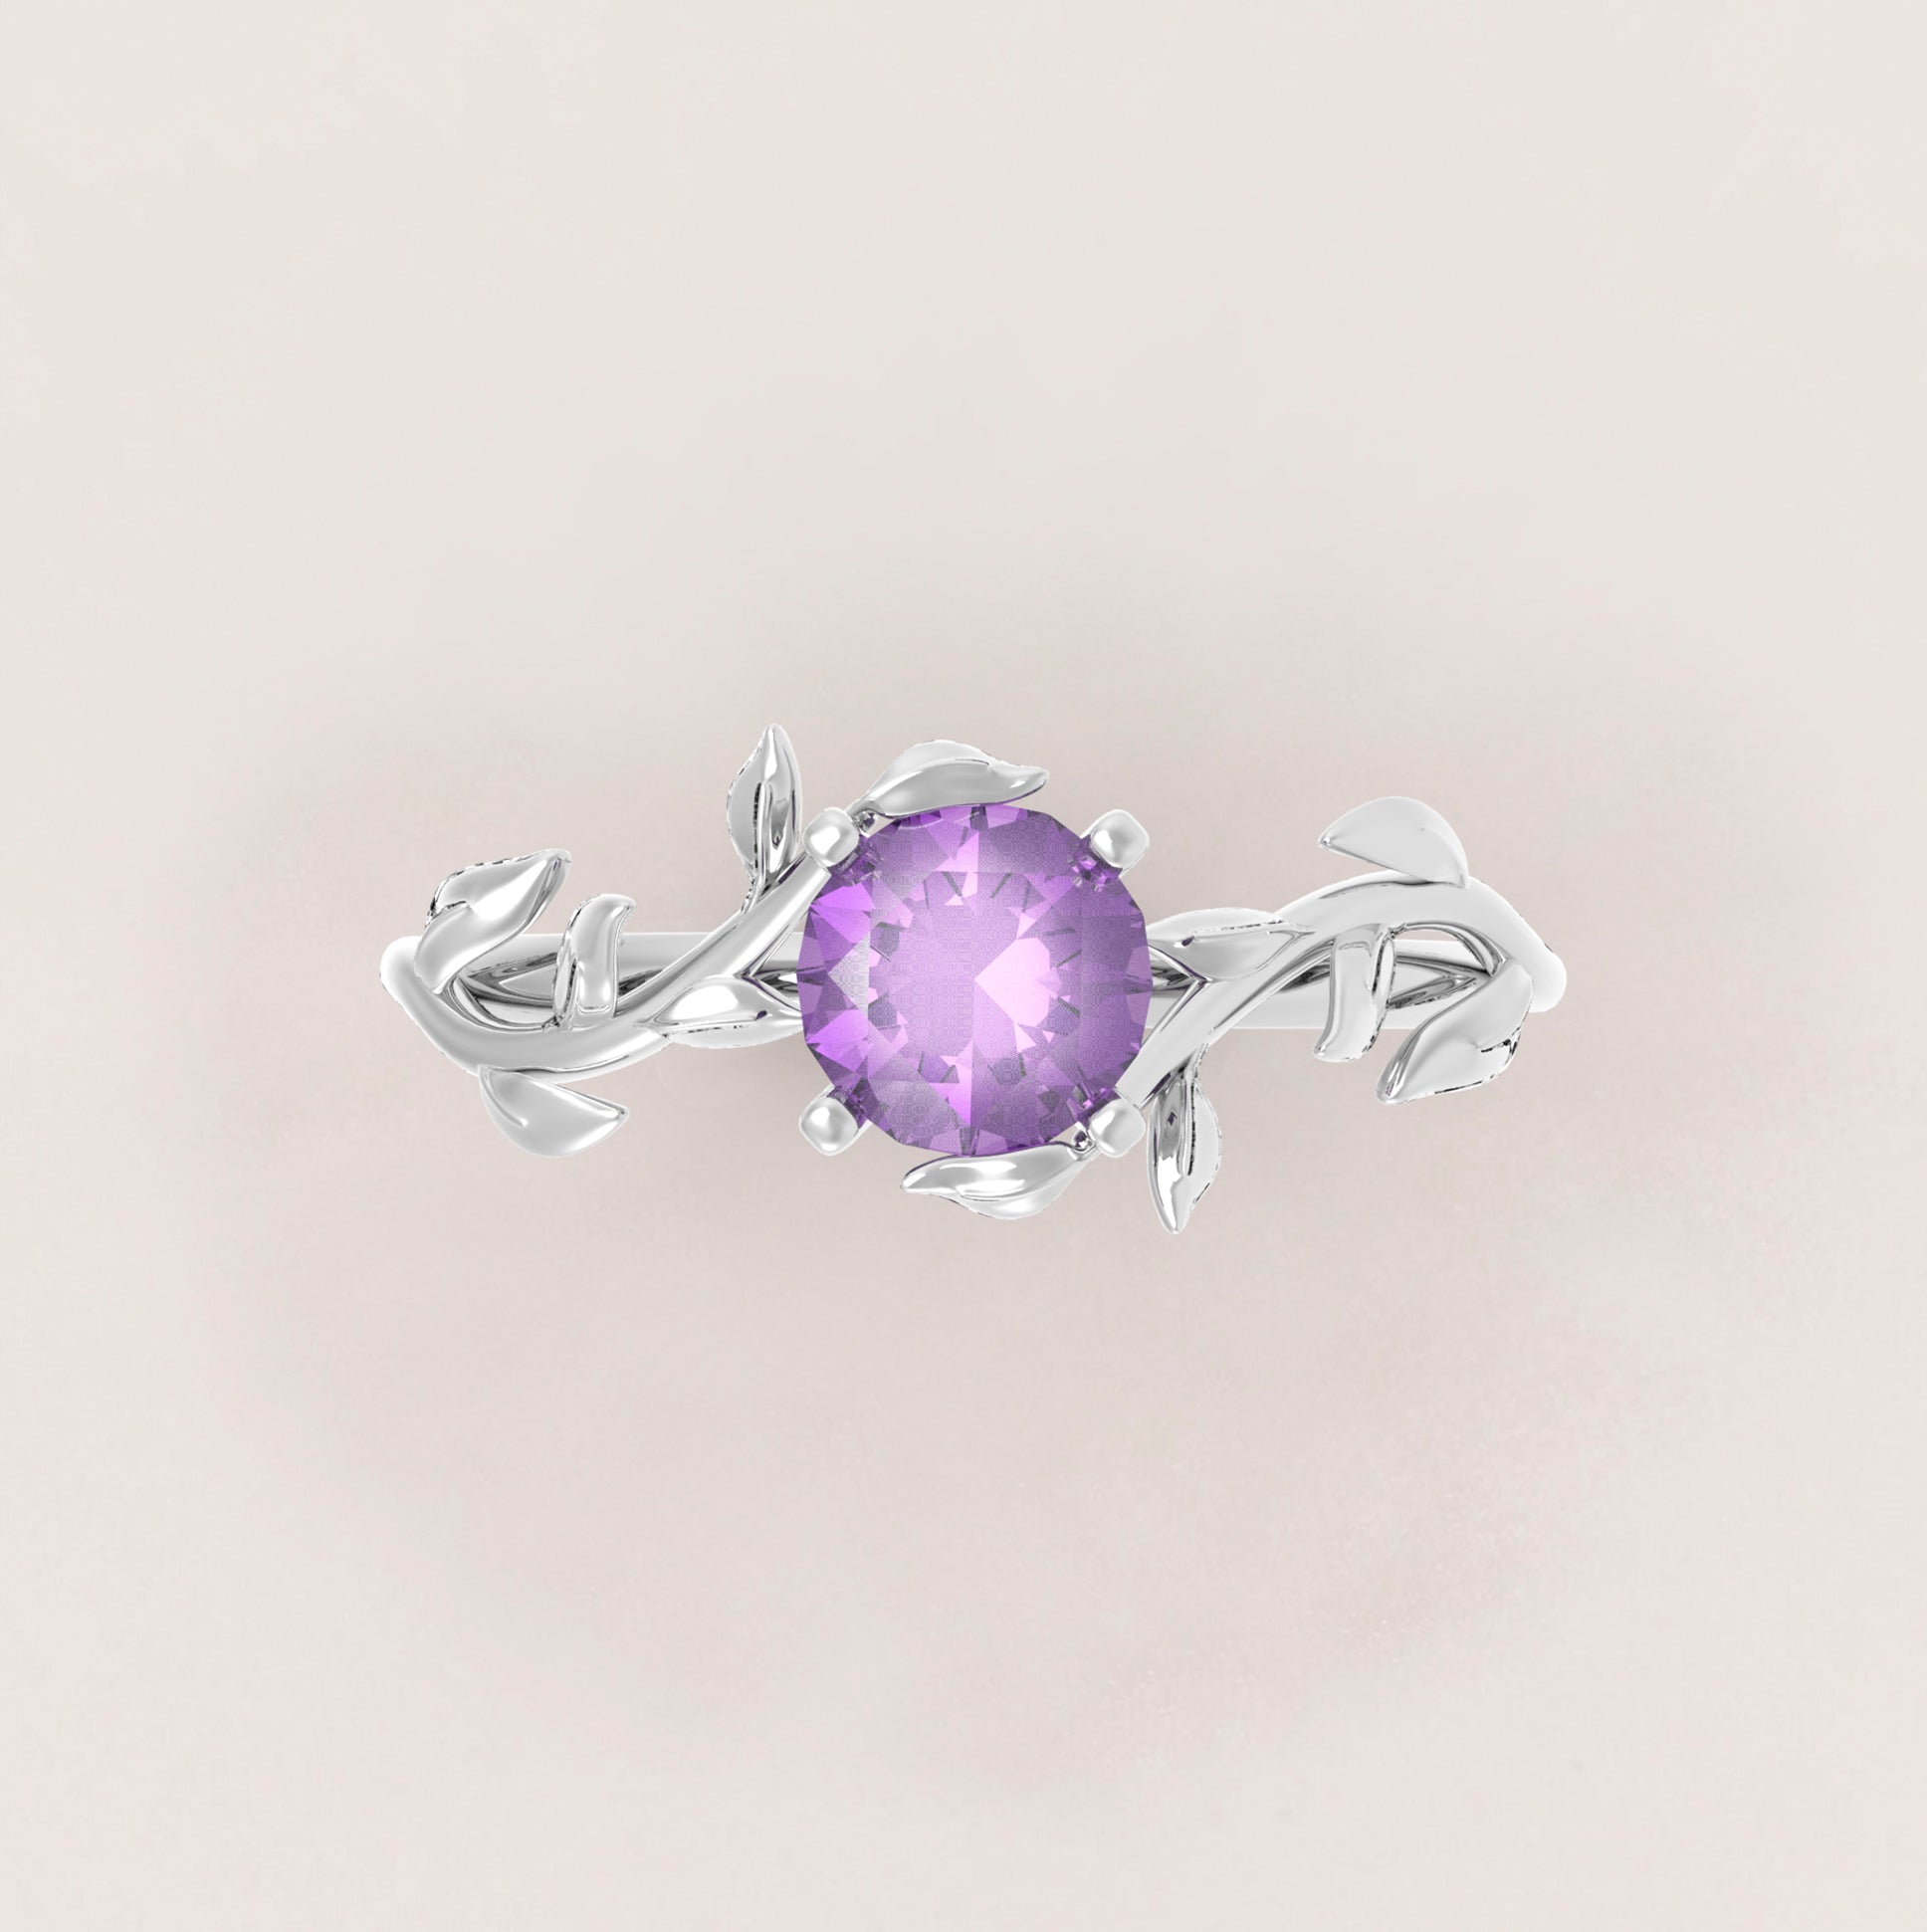 Unique Leaves Engagement Ring No.5 in White Gold - Amethyst - Roelavi